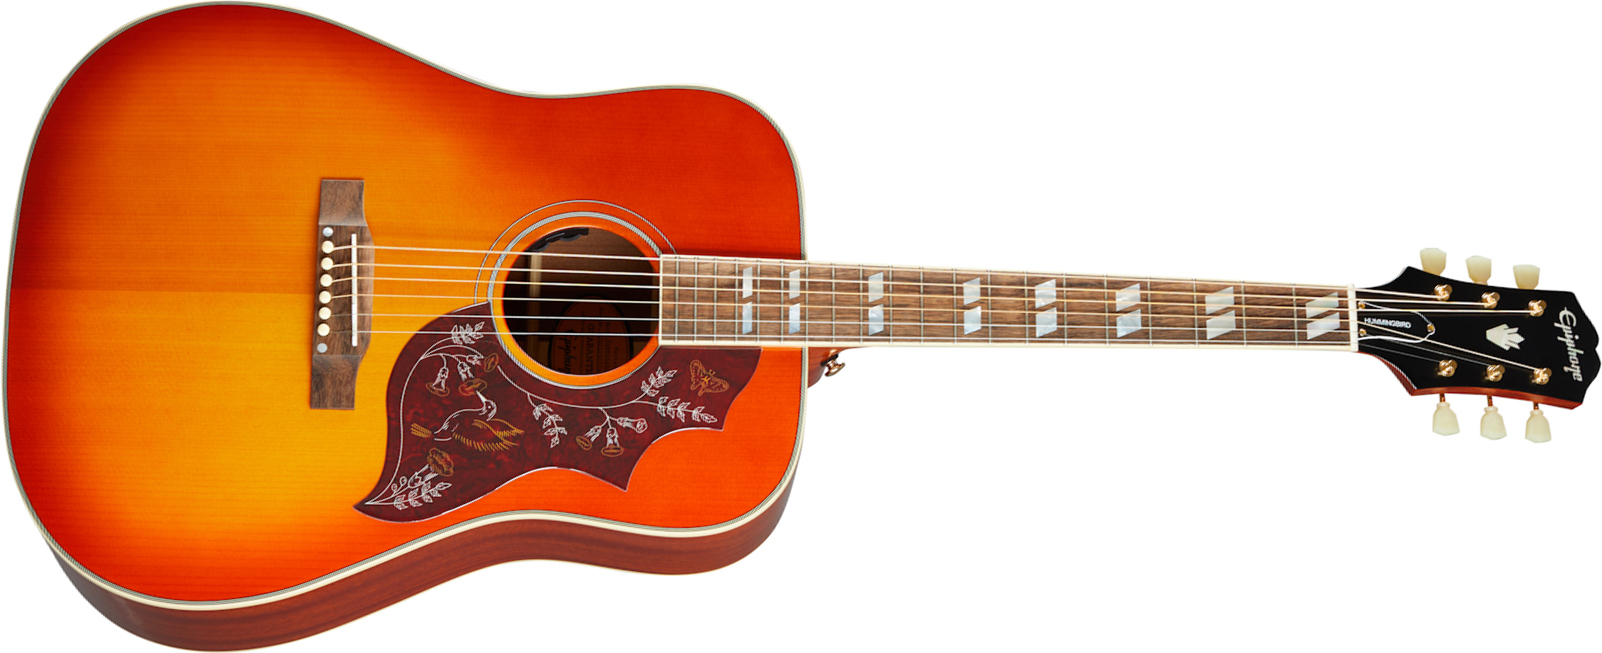 Epiphone Hummingbird Inspired By Gibson Dreadnought Epicea Acajou Lau - Aged Cherry Sunburst - Guitare Electro Acoustique - Main picture